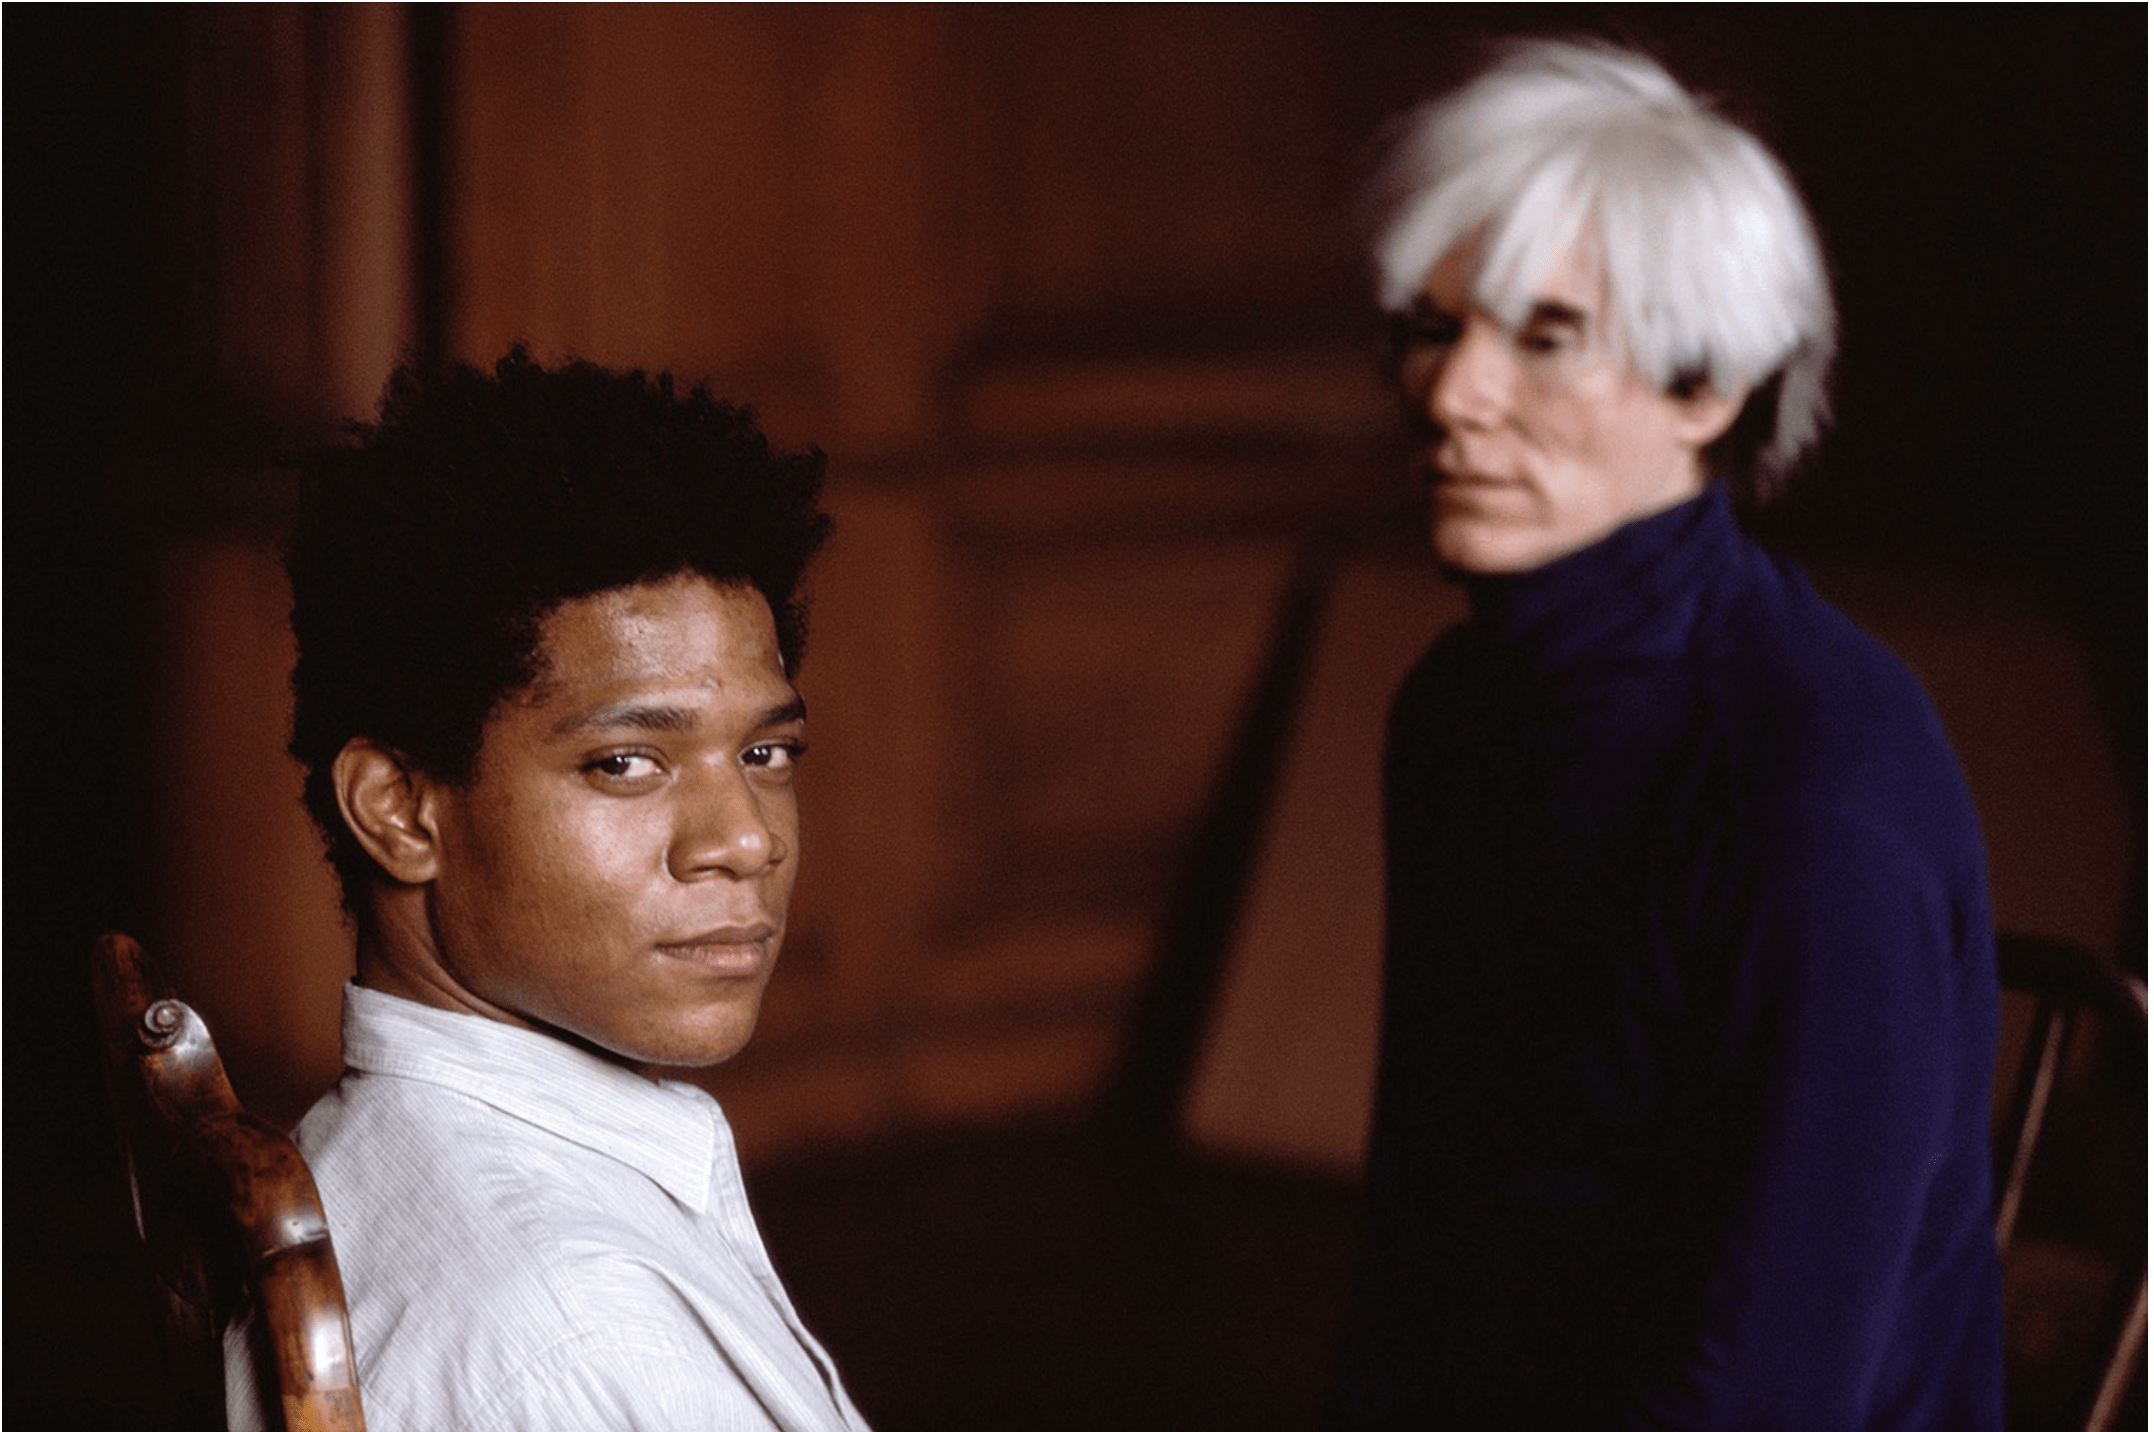 Jean-Michel Basquiat and Andy Warhol photographed by Richard Schulman © 1984